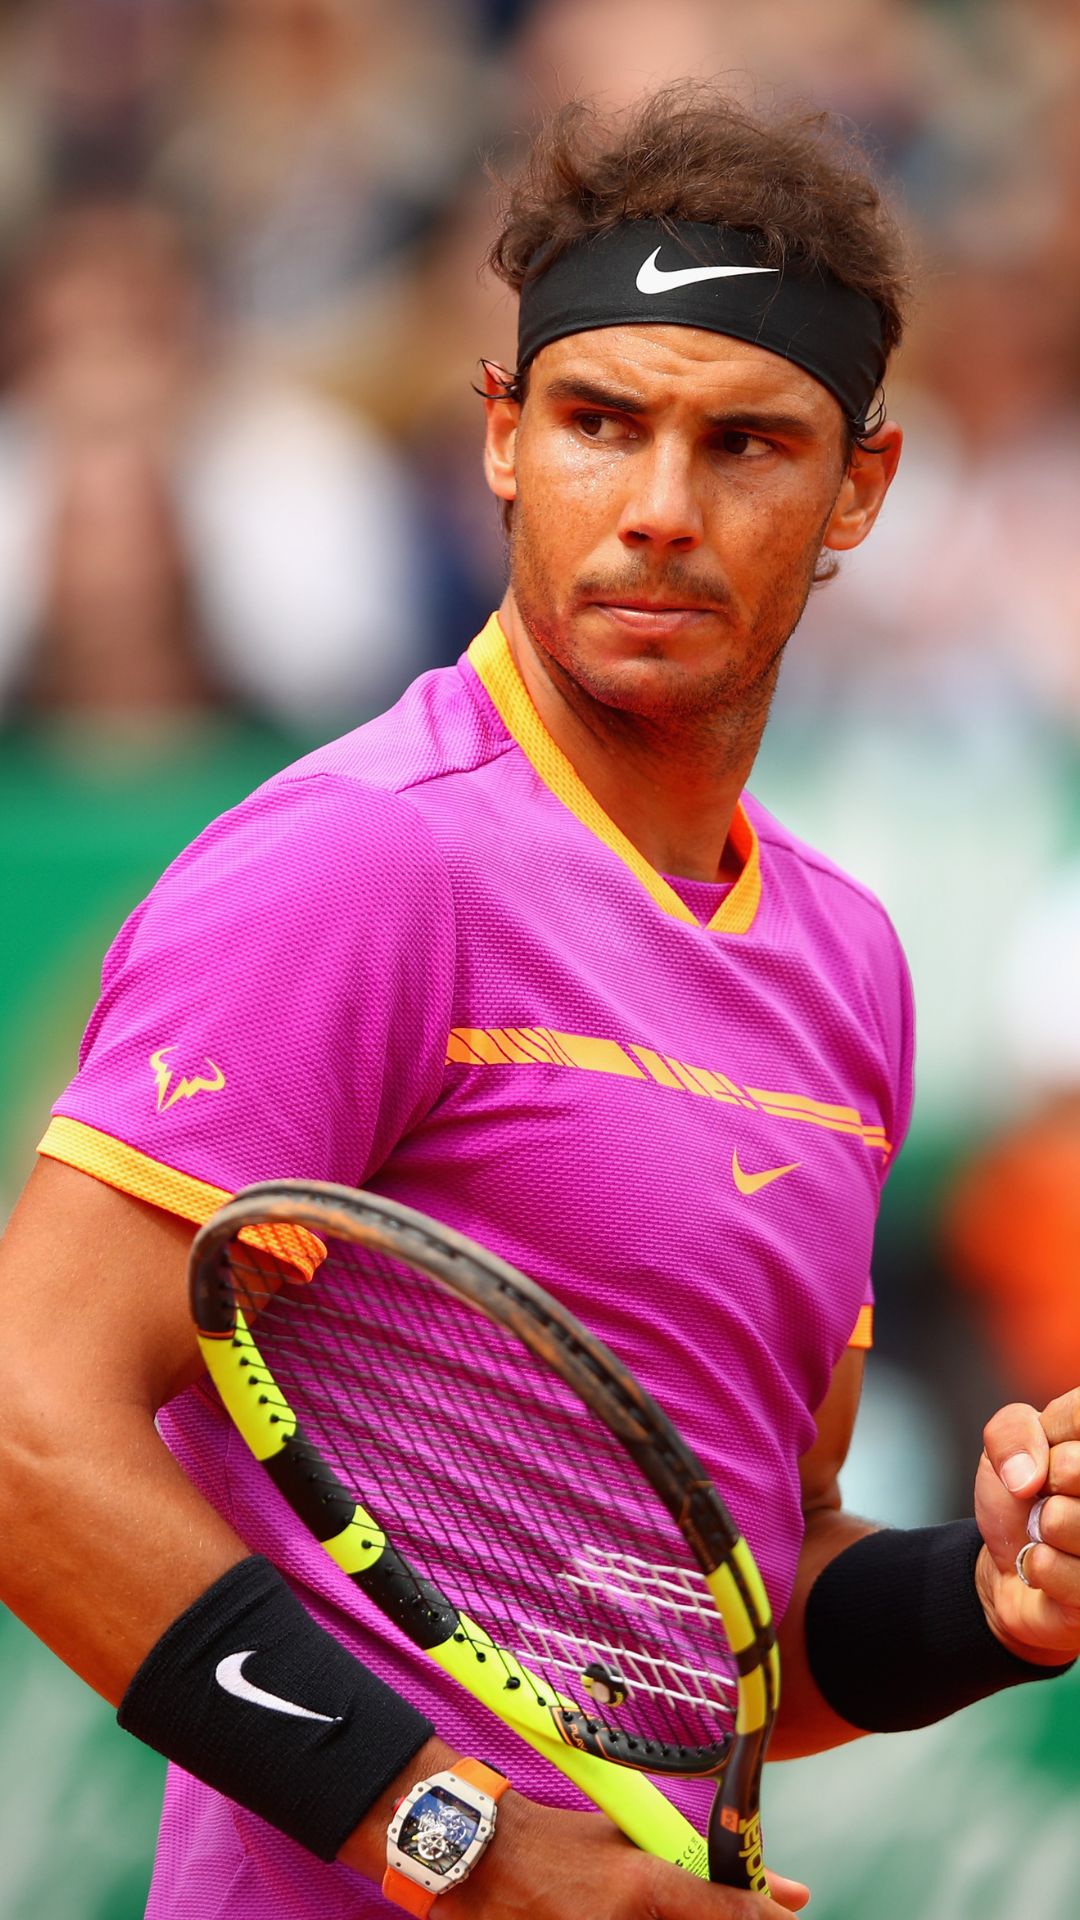 Top 10 Tennis Records by King of Clay as Rafael Nadal celebrates his 37th Birthday